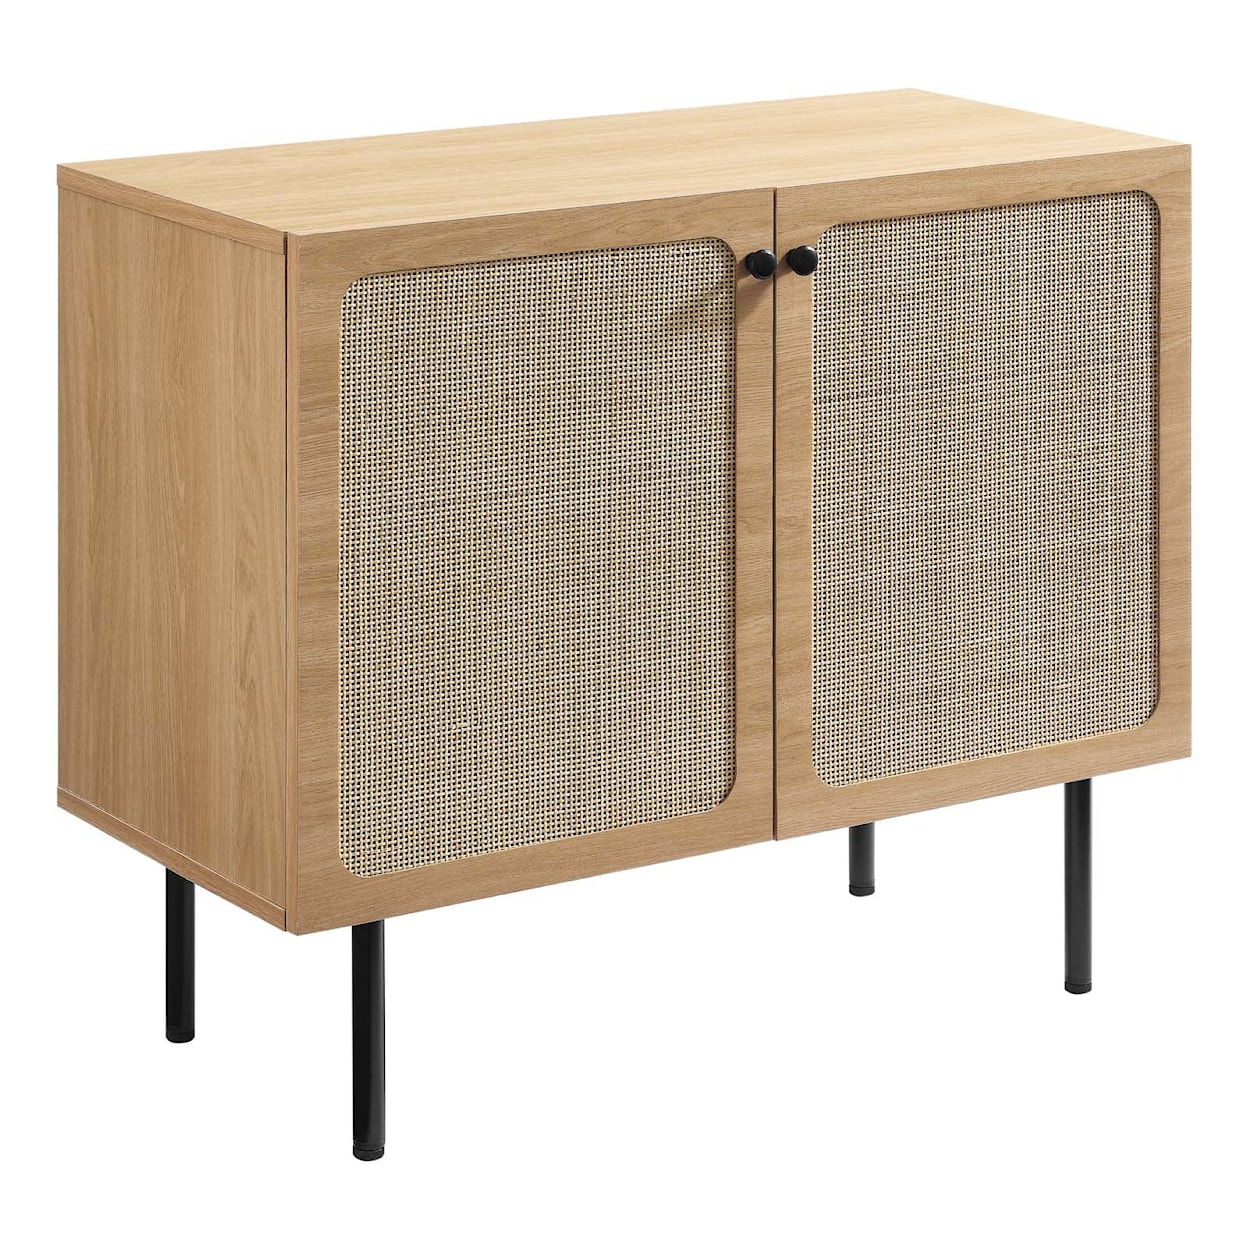 Modway Chaucer Accent Cabinet